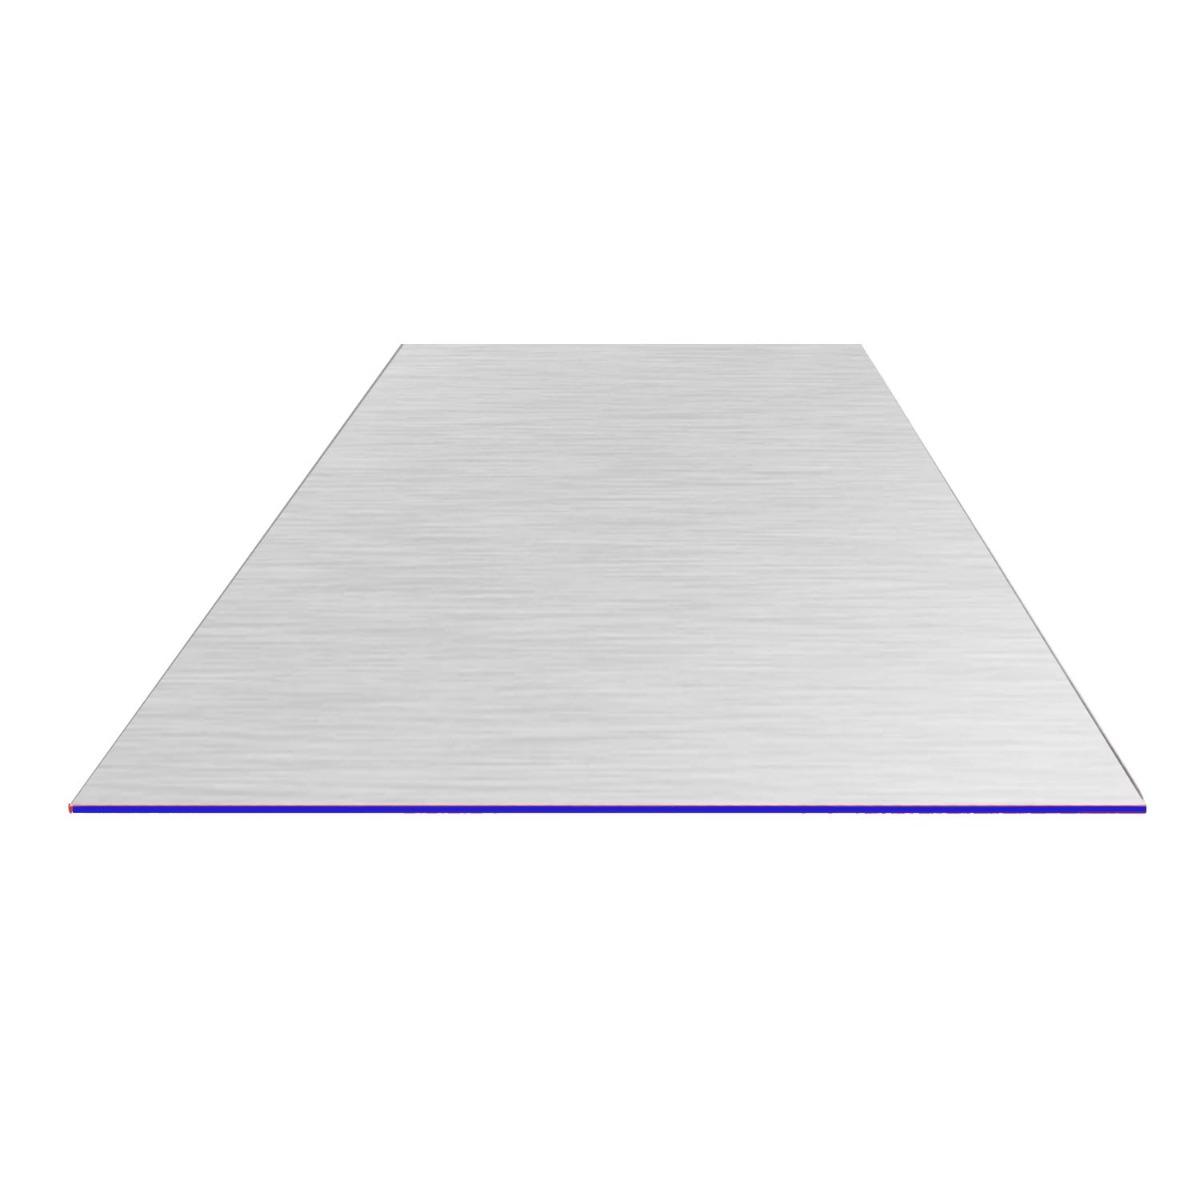 Cut To Size 6061 Aluminum Sheets Supplier In Los Angeles